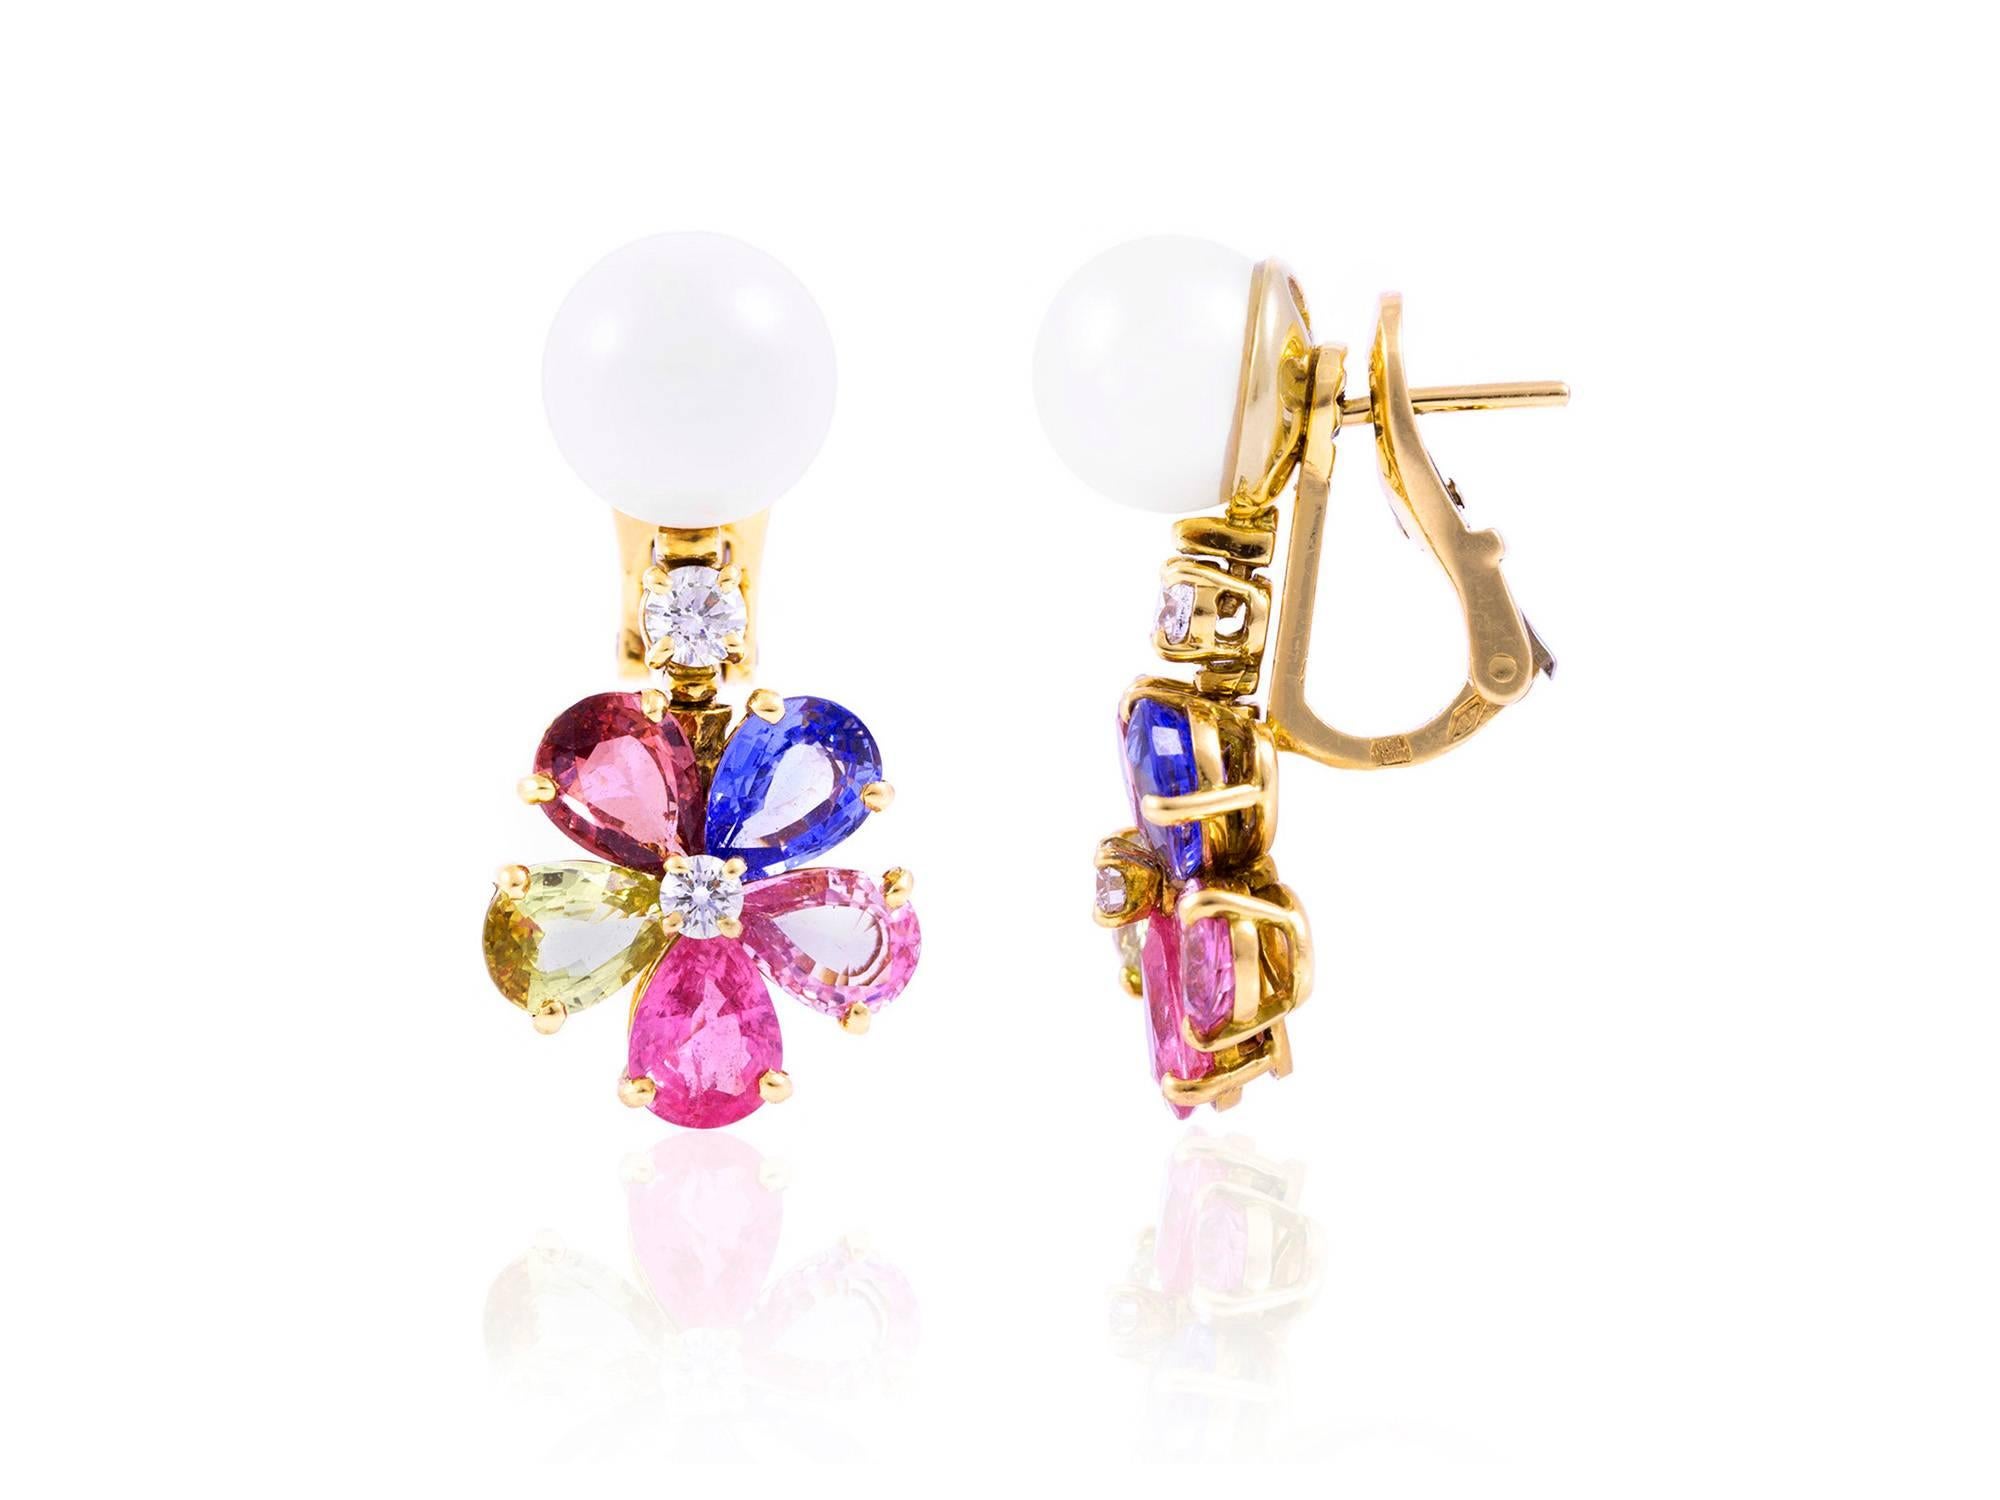 Bvlgari pearl multi-colored sapphires and diamond earrings finely crafted in 18k yellow gold with diamonds weighing 0.42 carat and sapphires weighing 7.78 carat.